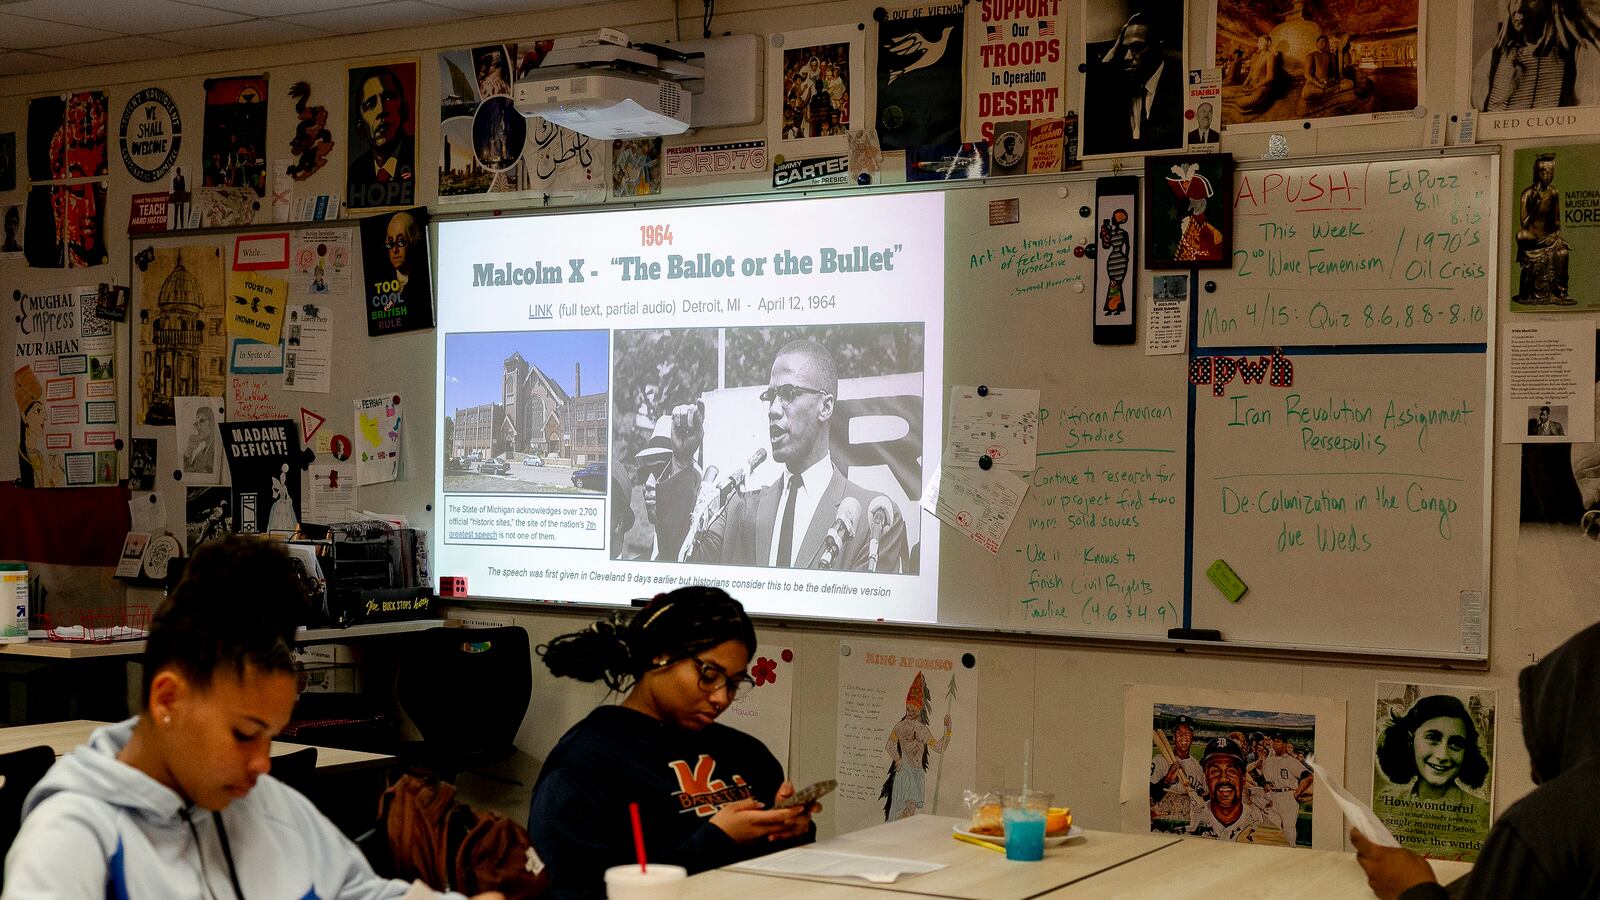 Two high school students work on classwork at desks with a large projector screen and a wall with posters in the background.